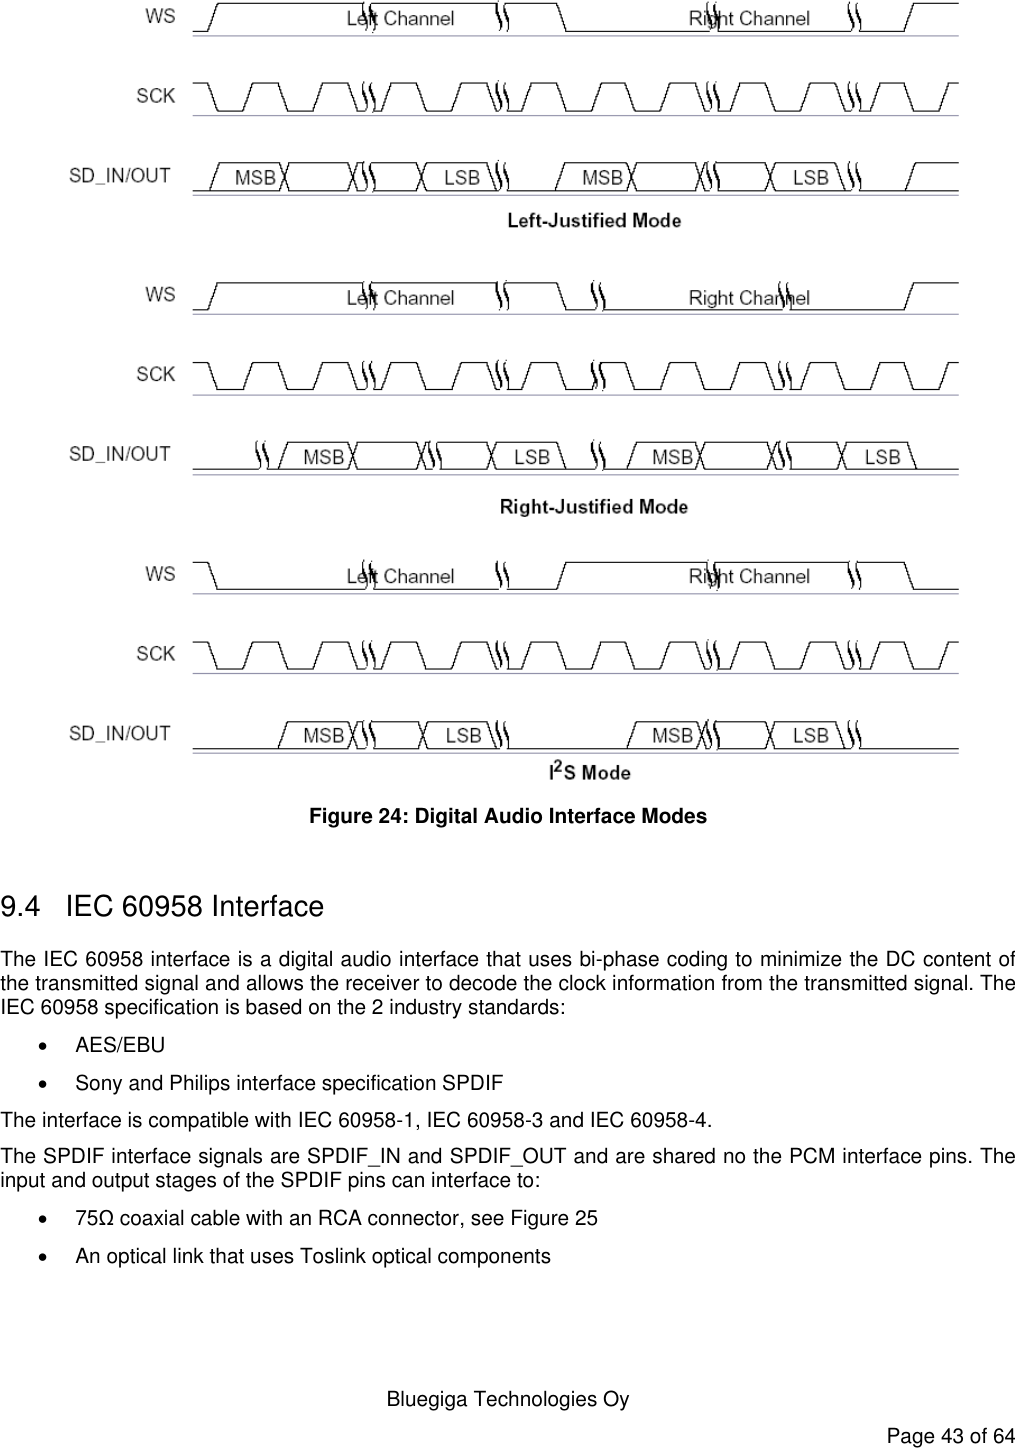   Bluegiga Technologies Oy Page 43 of 64  Figure 24: Digital Audio Interface Modes  9.4  IEC 60958 Interface The IEC 60958 interface is a digital audio interface that uses bi-phase coding to minimize the DC content of the transmitted signal and allows the receiver to decode the clock information from the transmitted signal. The IEC 60958 specification is based on the 2 industry standards:  AES/EBU   Sony and Philips interface specification SPDIF The interface is compatible with IEC 60958-1, IEC 60958-3 and IEC 60958-4. The SPDIF interface signals are SPDIF_IN and SPDIF_OUT and are shared no the PCM interface pins. The input and output stages of the SPDIF pins can interface to:  75Ω coaxial cable with an RCA connector, see Figure 25   An optical link that uses Toslink optical components 